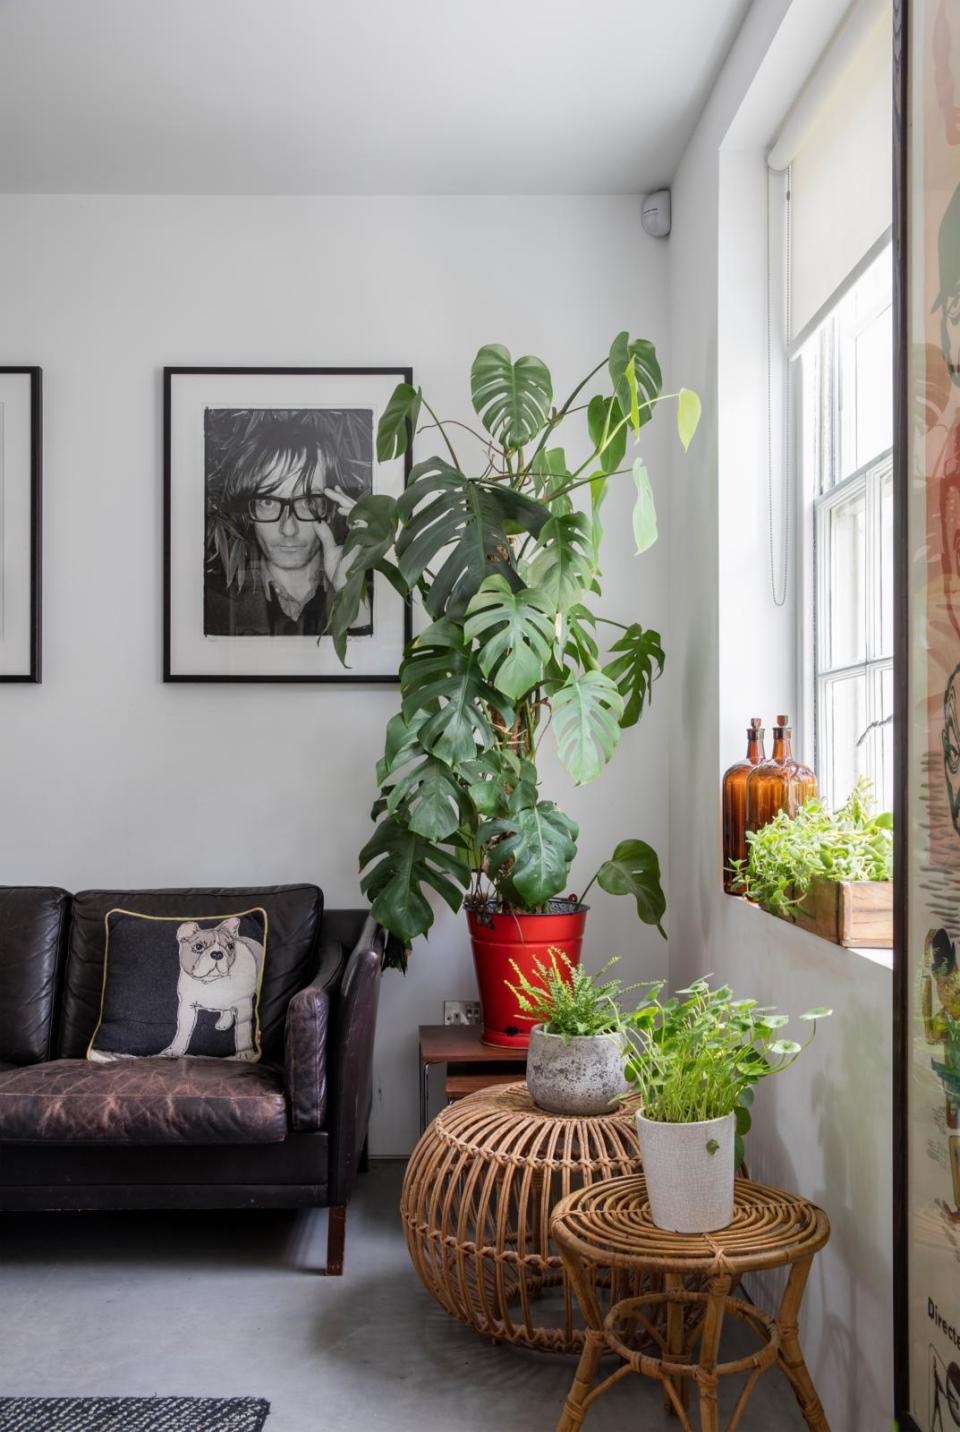 A living room with a large, tall leafy plant in a red pot